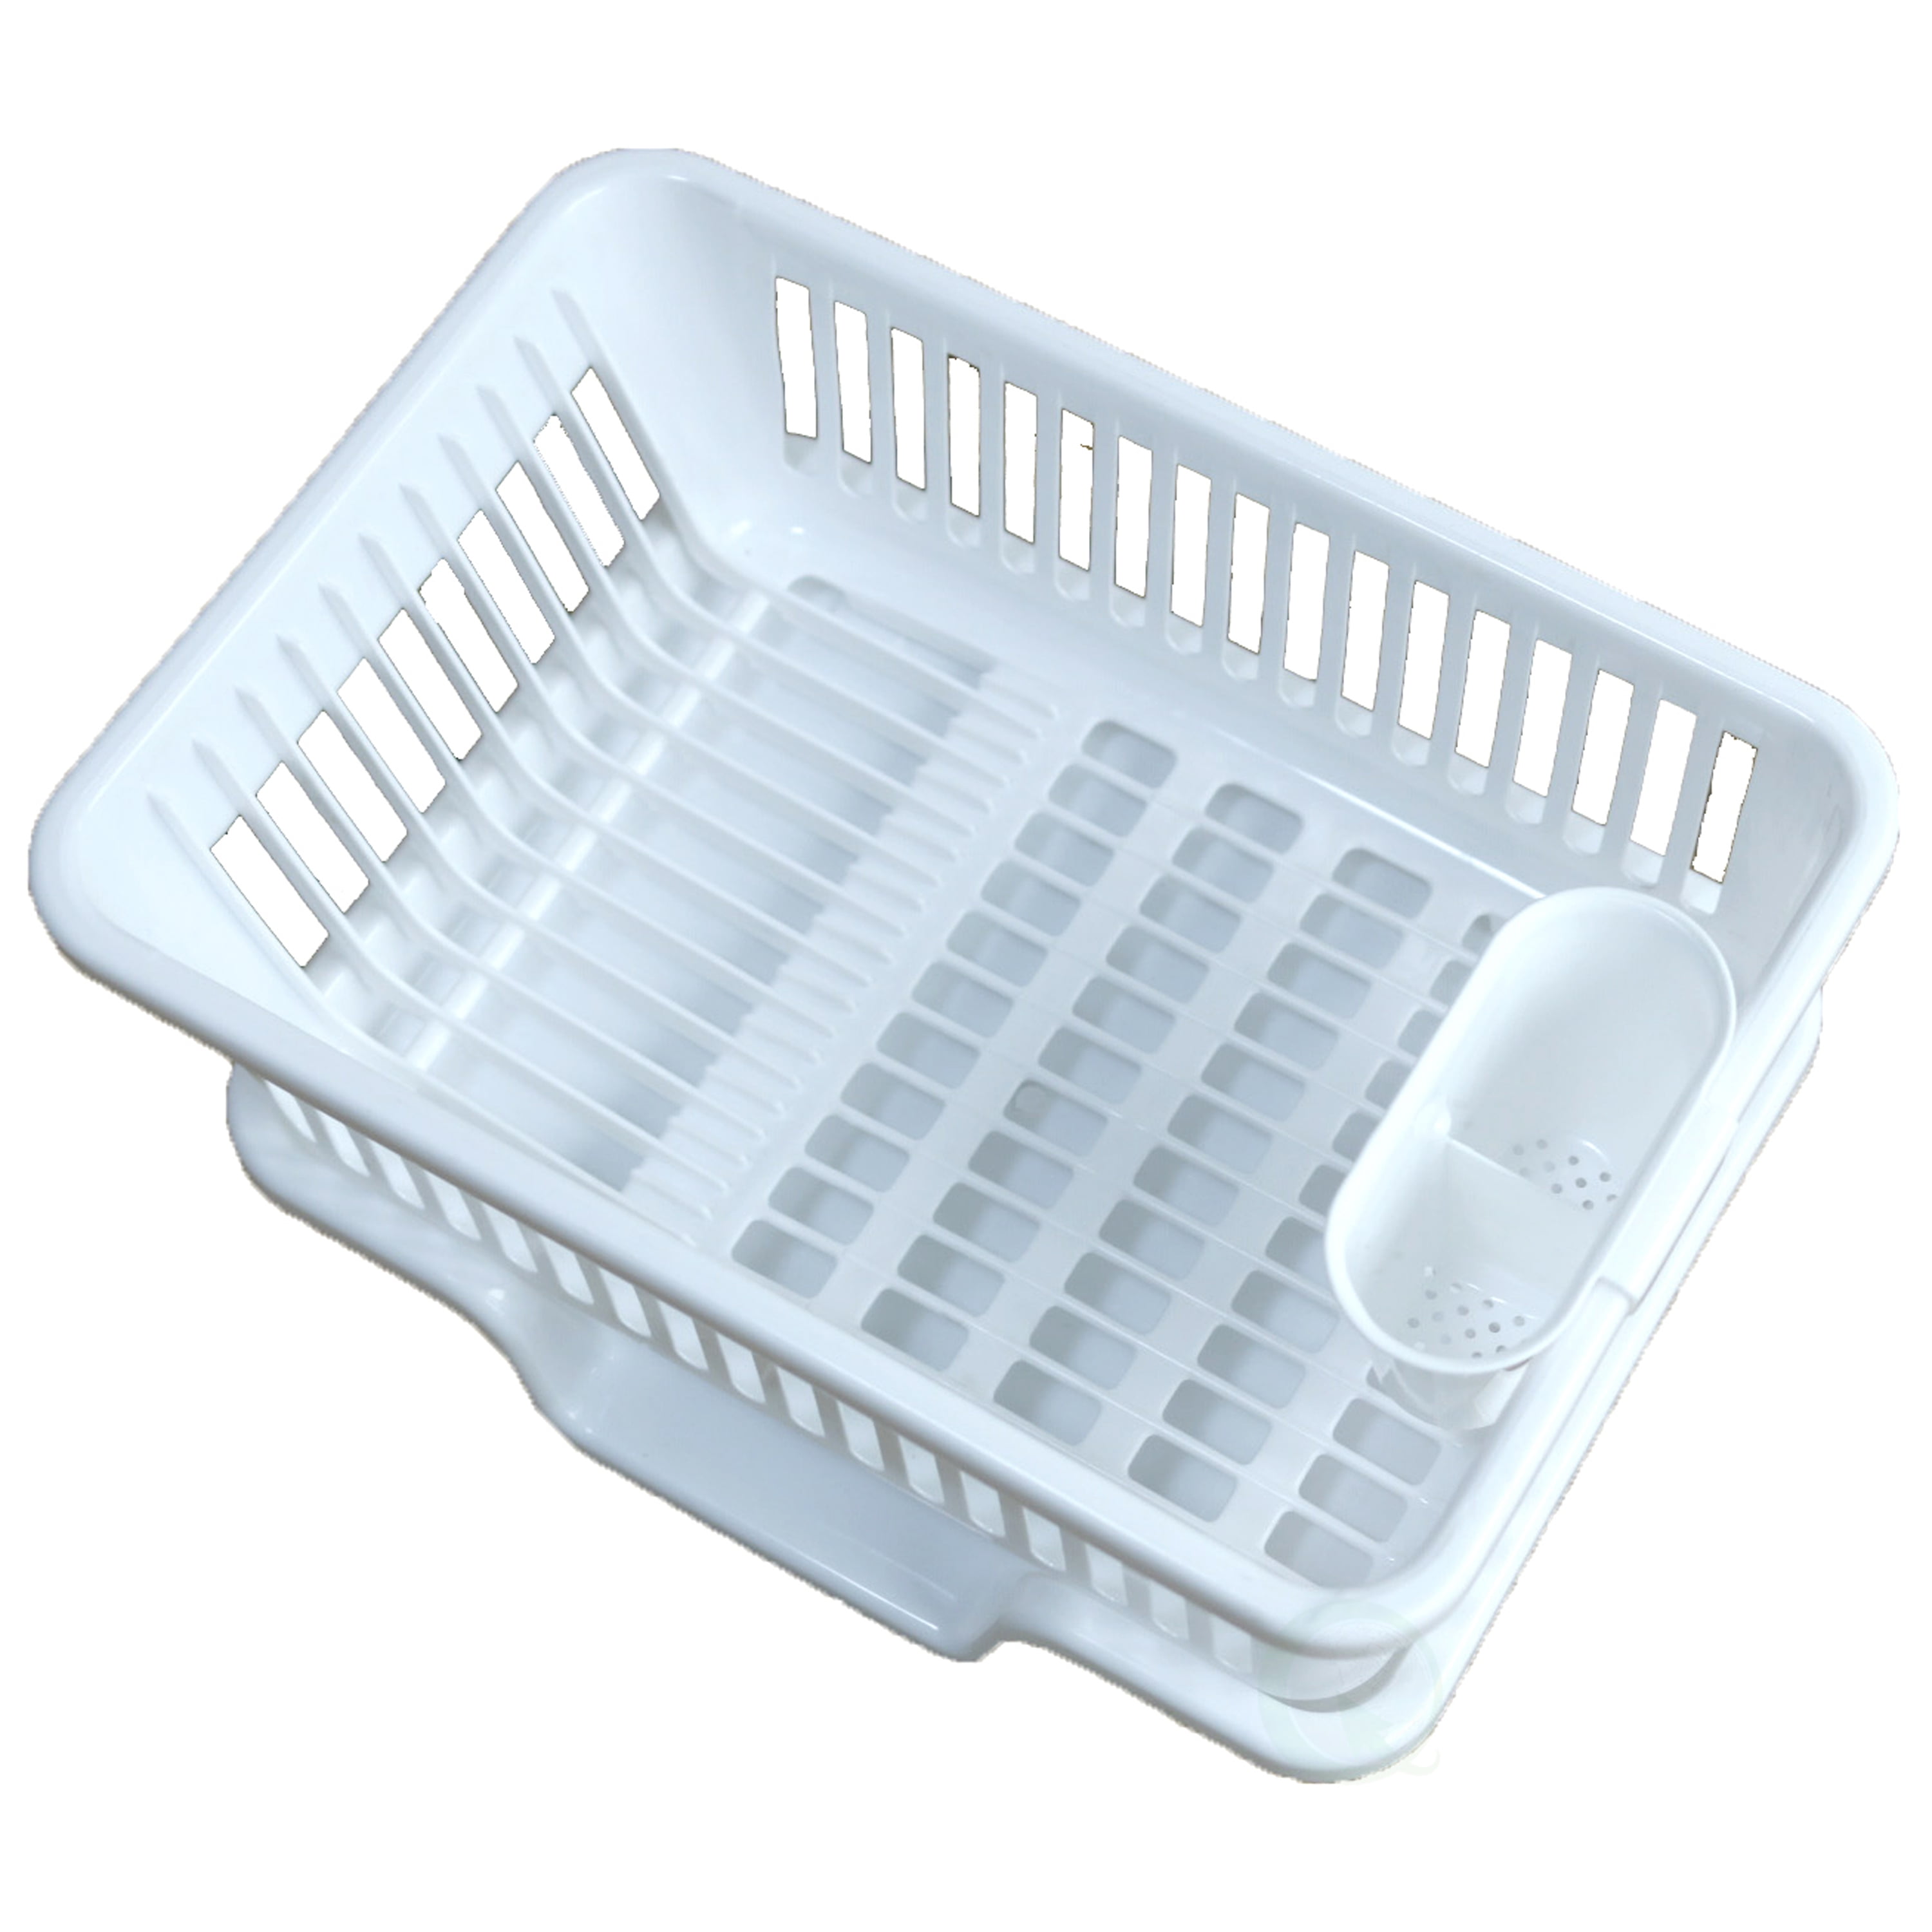 Dish Drying Rack, Ace Teah Small Dish Rack Drainer Set with Drain